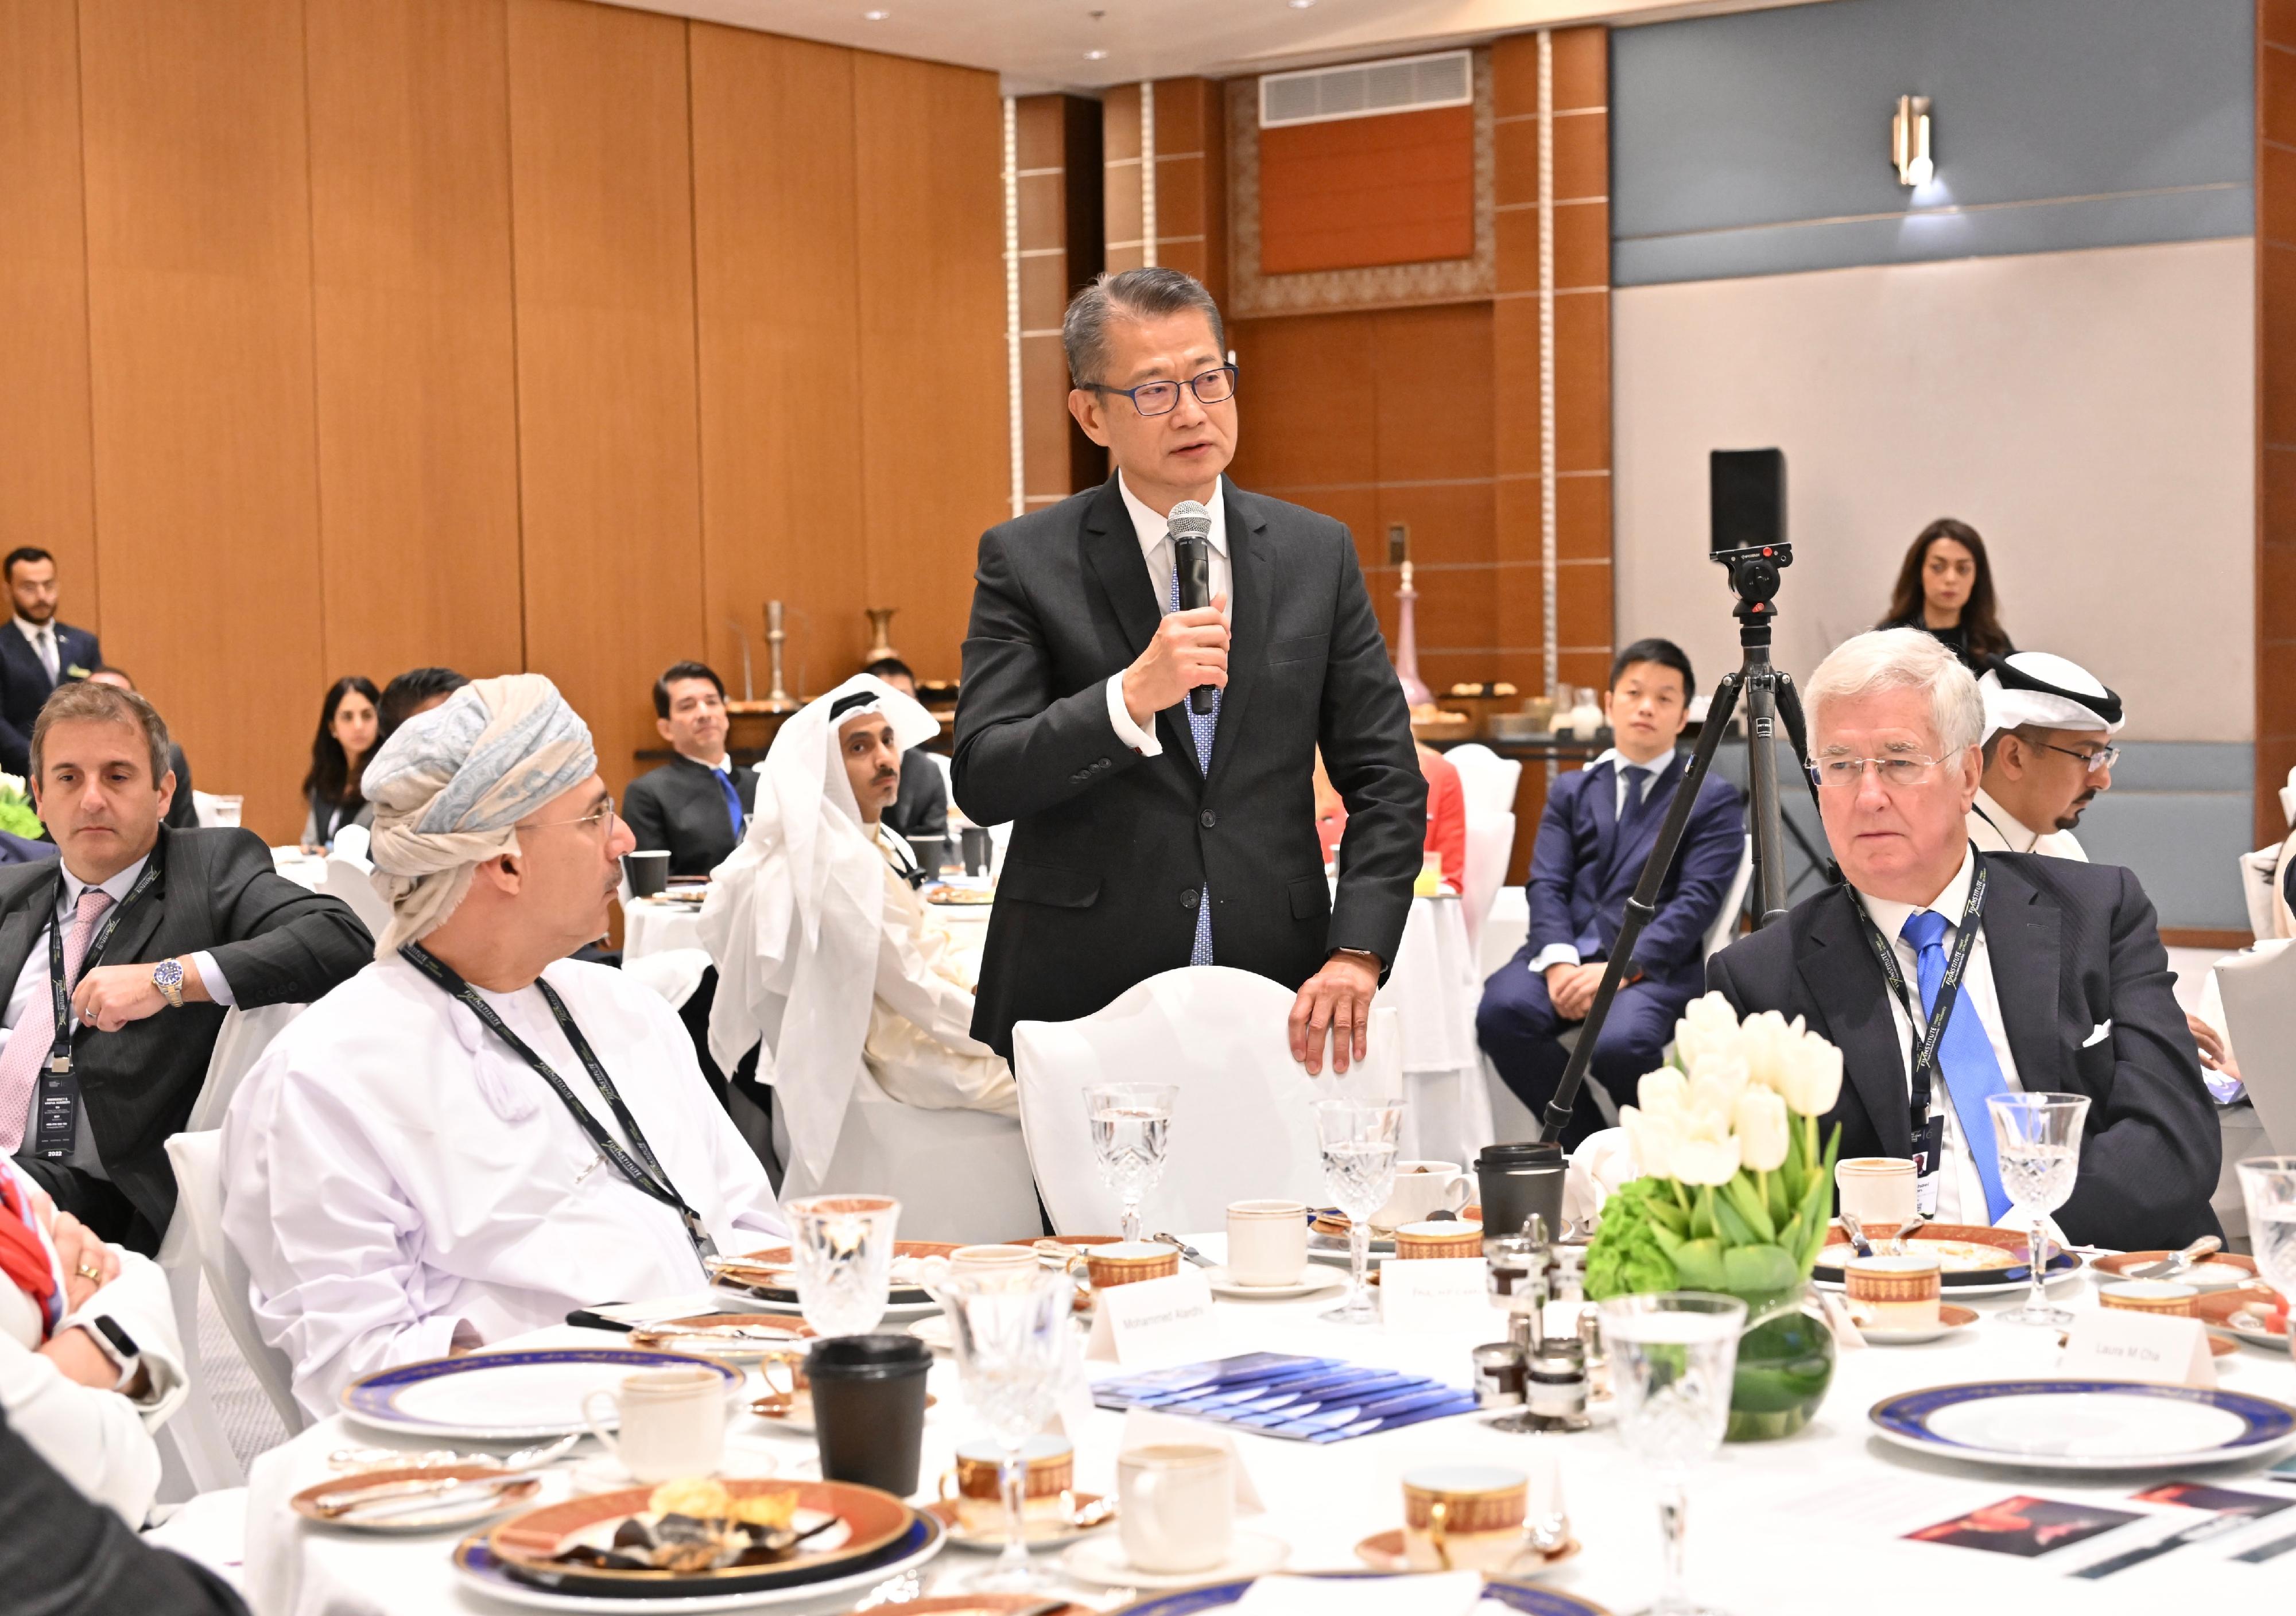 The Financial Secretary, Mr Paul Chan, is continuing his visit to Riyadh, Saudi Arabia today (October 26, Saudi Arabia time). Mr Chan attended a breakfast seminar jointly organised by the Hong Kong Economic and Trade Office in Dubai and the Hong Kong Exchanges and Clearing Limited. Photo shows Mr Chan exchanging views with participants.